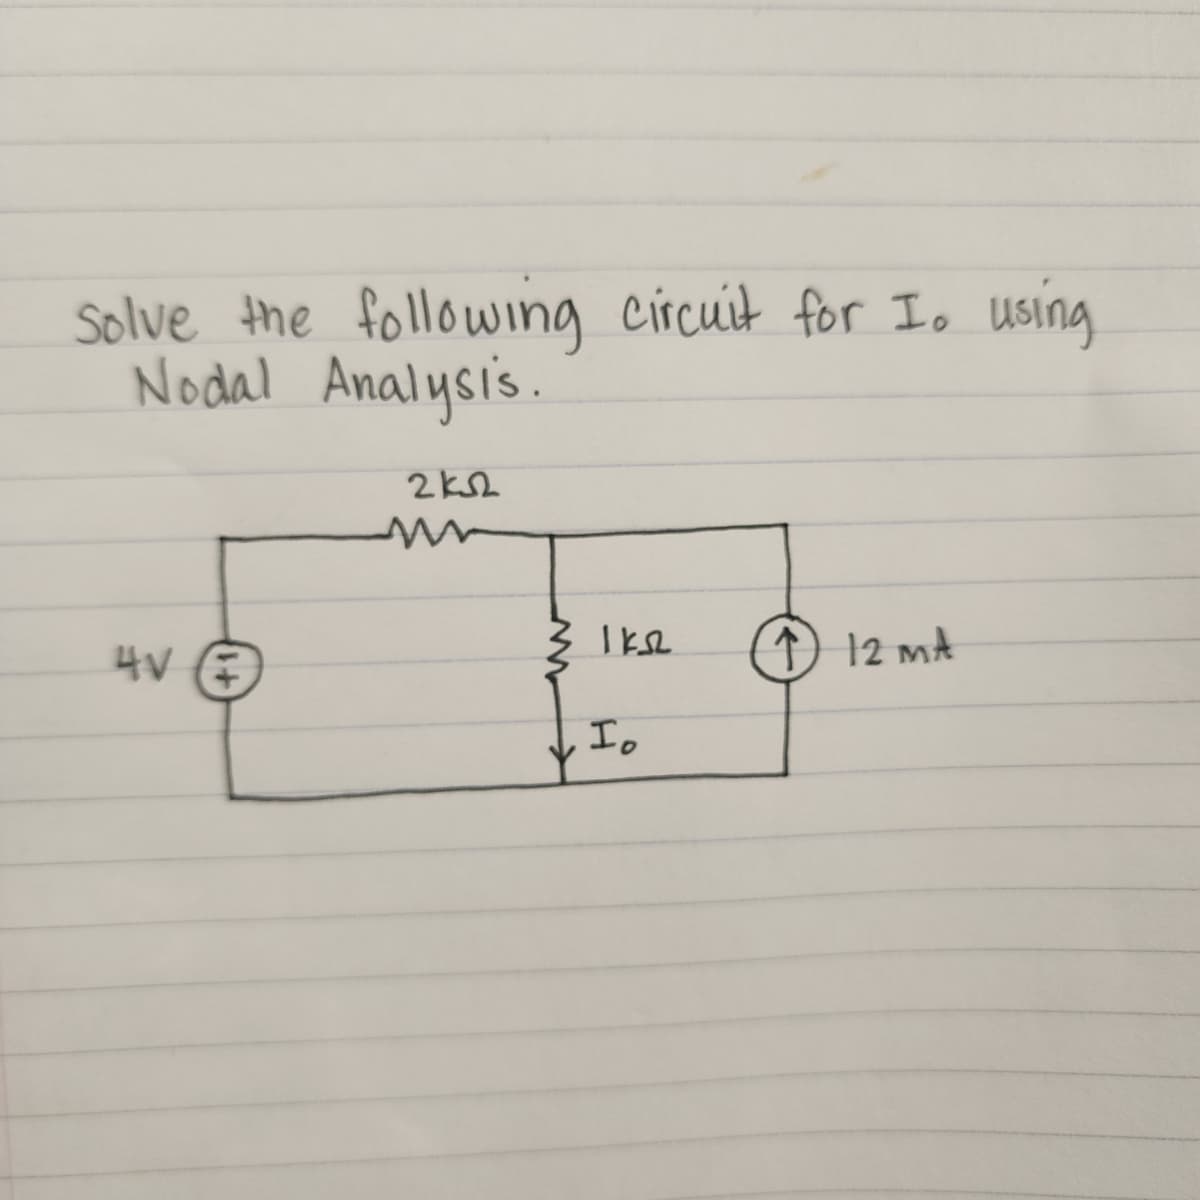 Solve the following circuit for I. using
Nodal Analysis.
ΣΚΩ
w
4√ F
ΙΚΩ
↑ 12 MA
Io